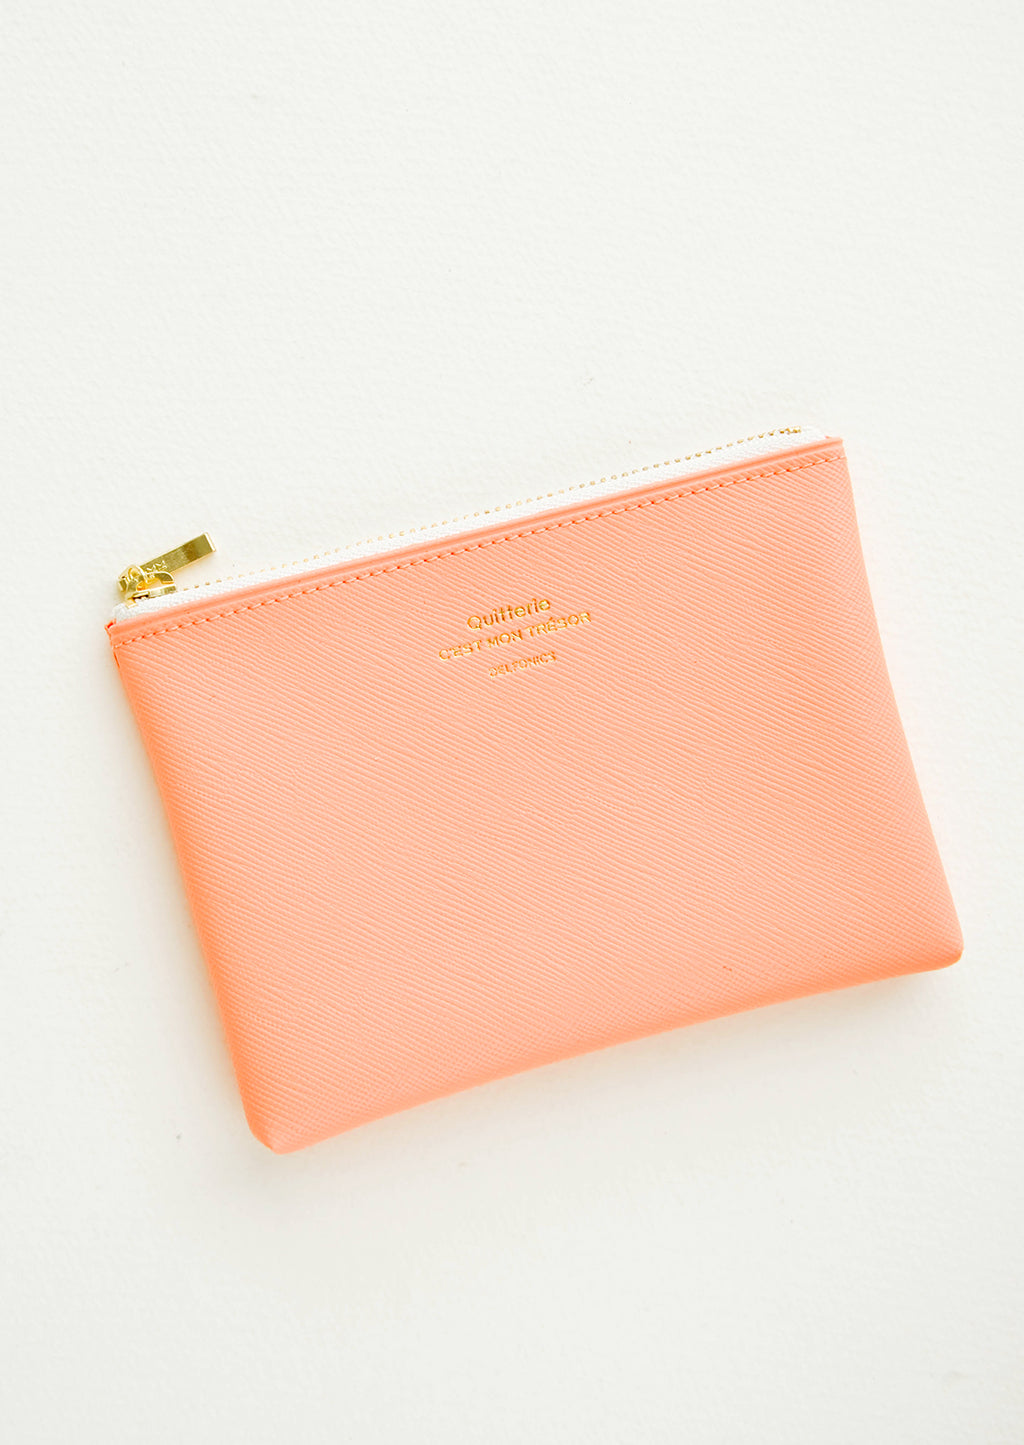 Peach / Small: Small vinyl coin pouch with gold zipper and crosshatch texture, in peach.